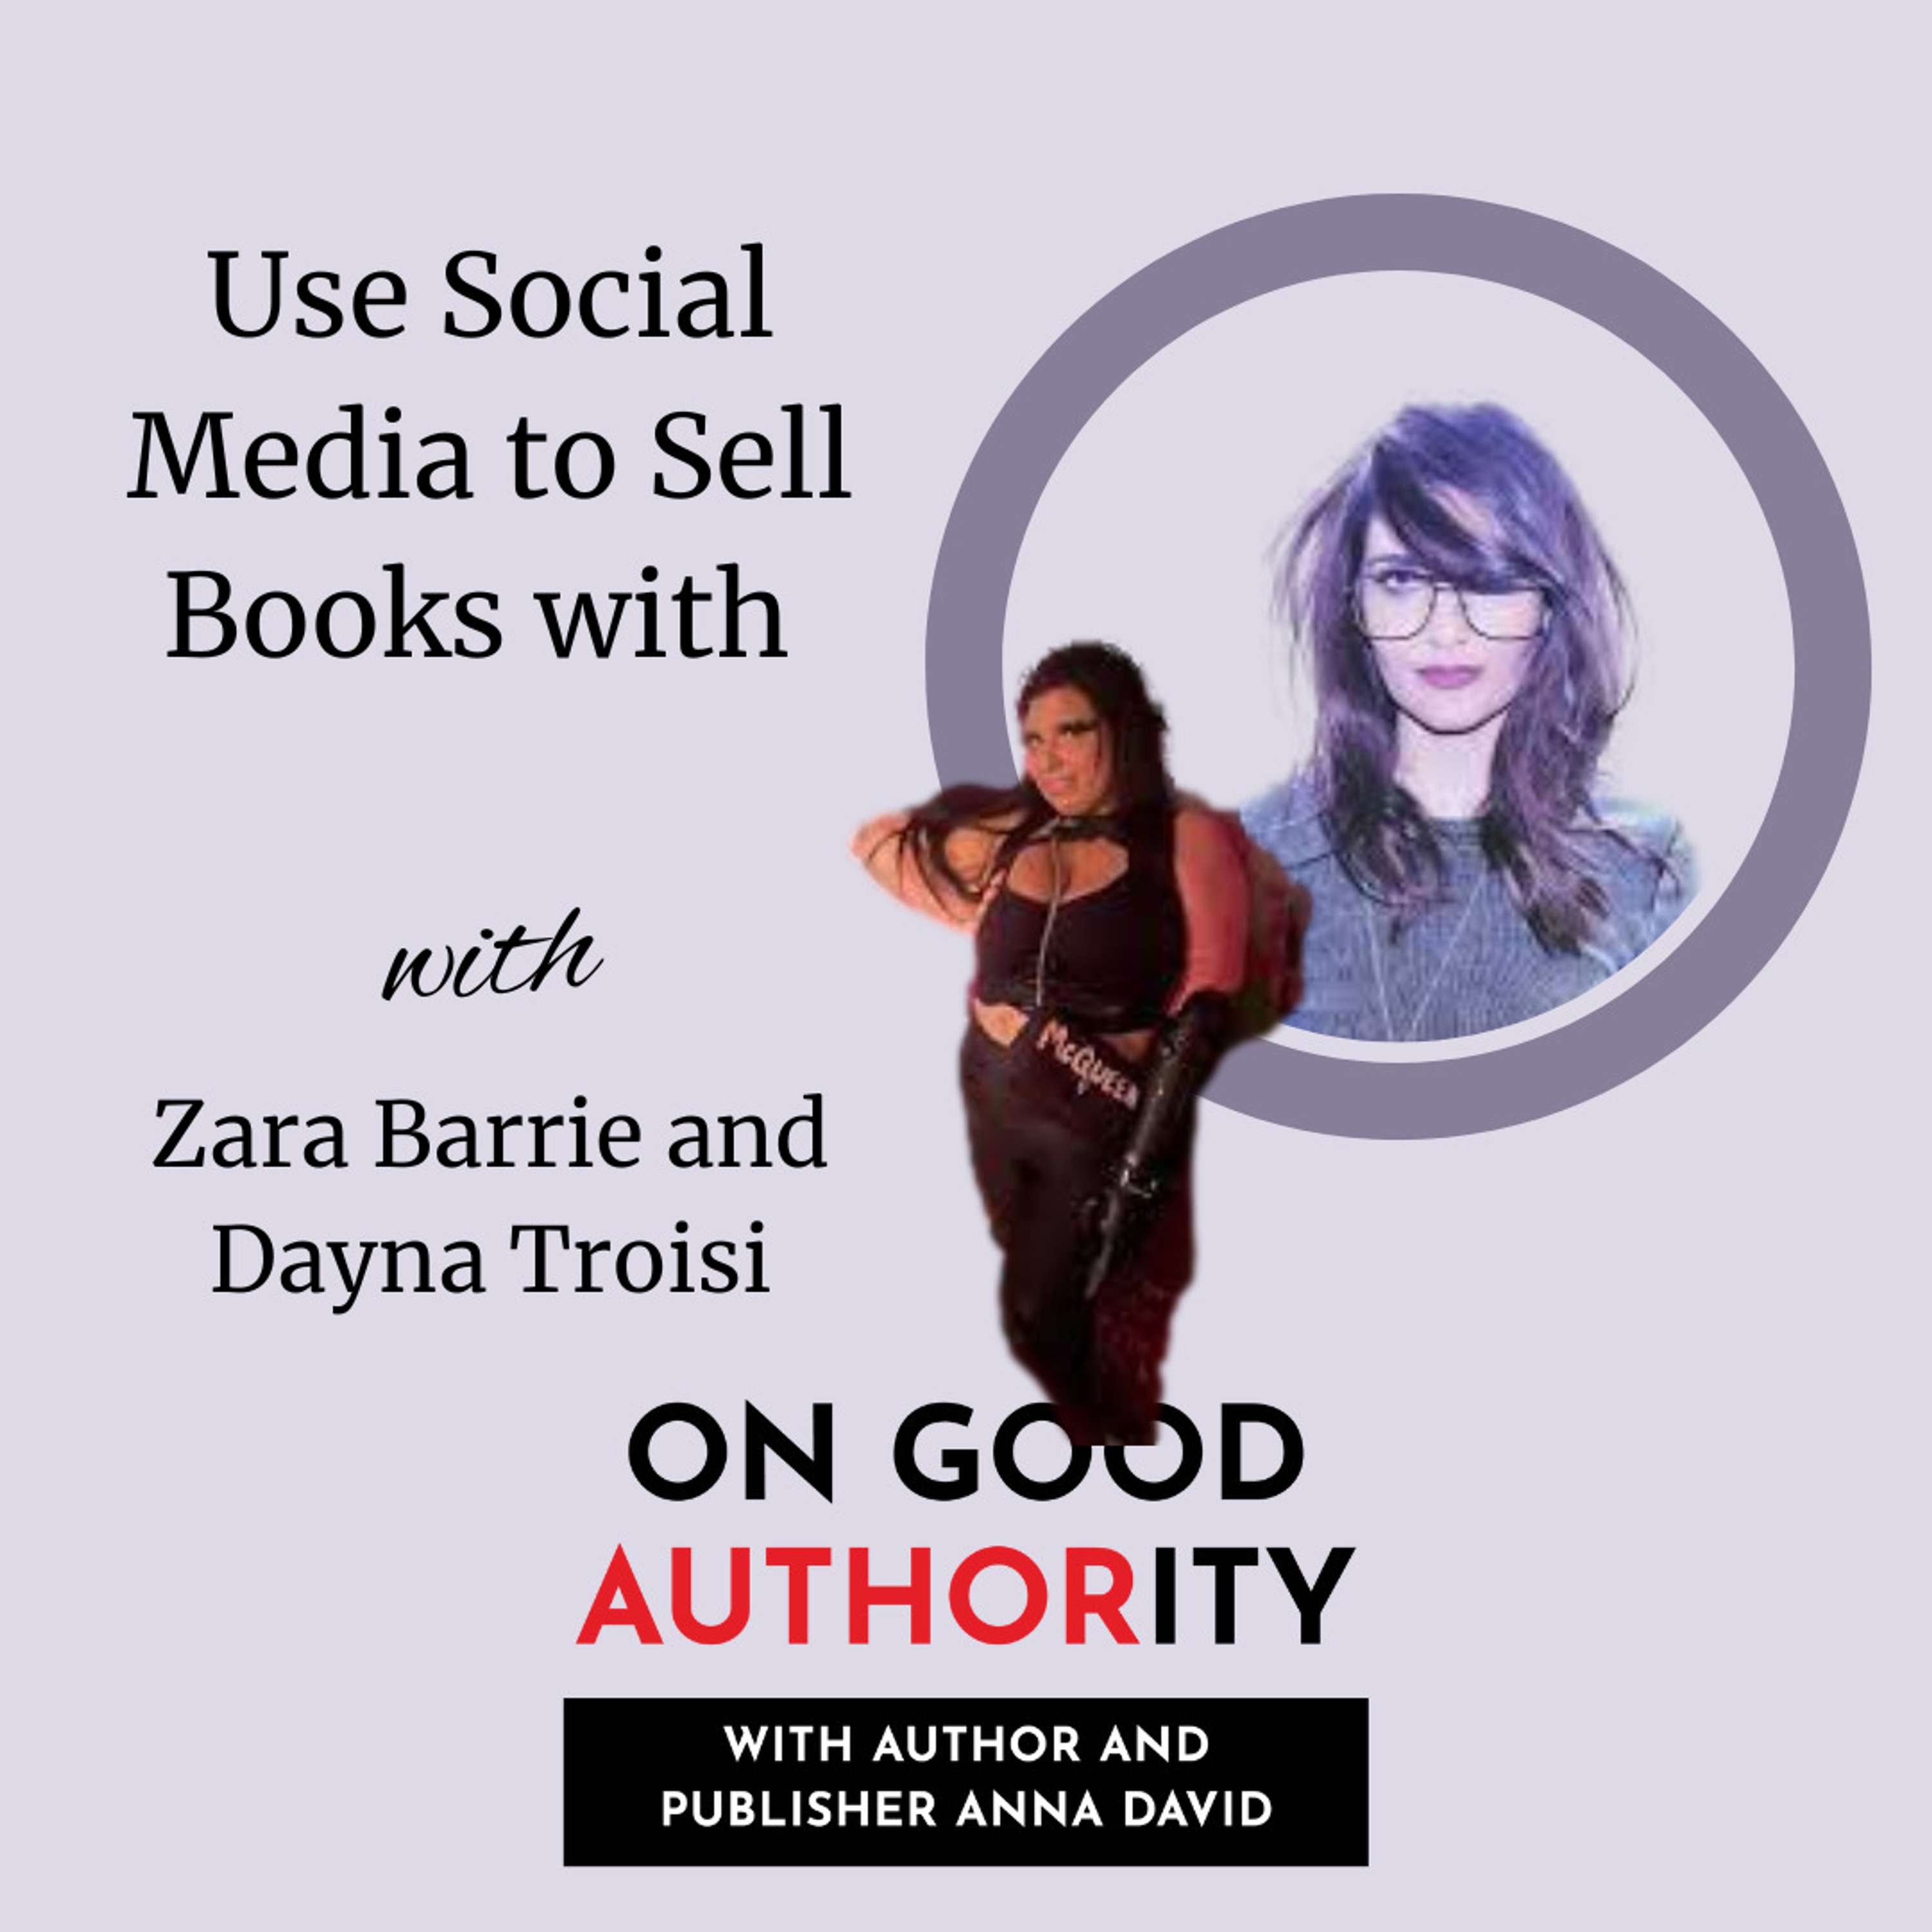 Use Social Media to Sell Books with Zara Barrie and Dayna Troisi